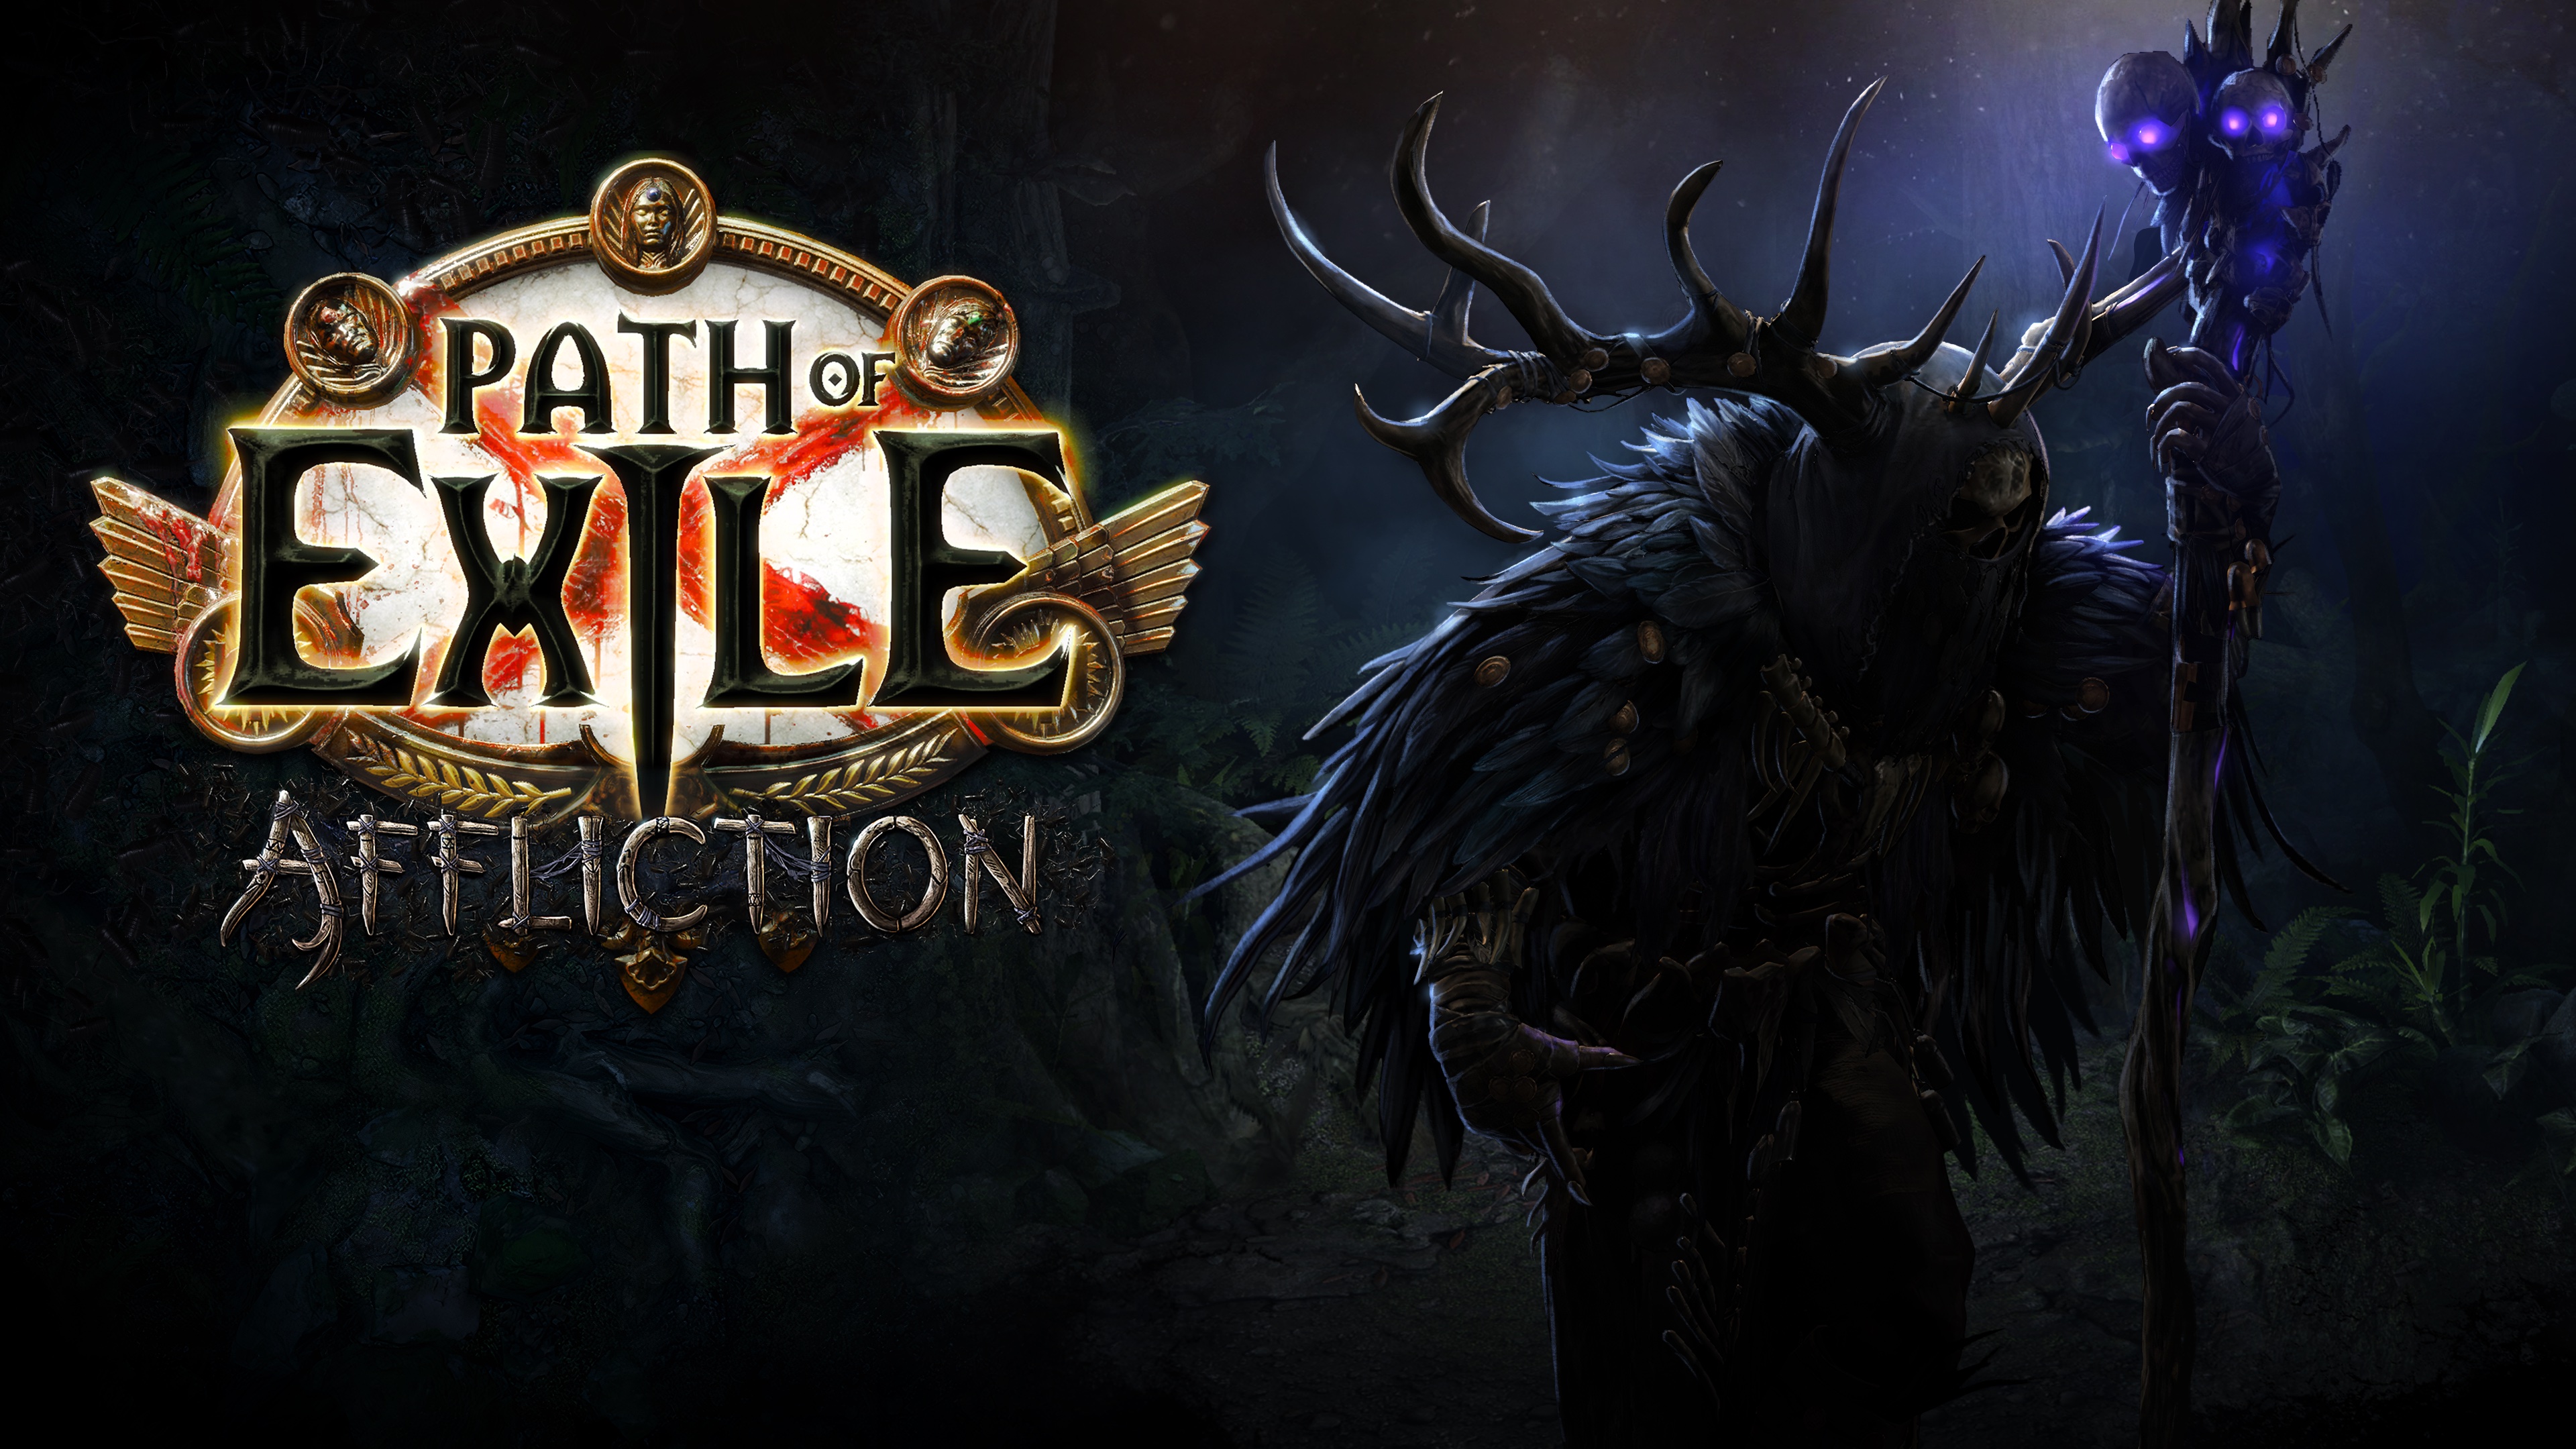 Path of Exile」、新シーズン「Affliction」が12月9日より開幕！ 新